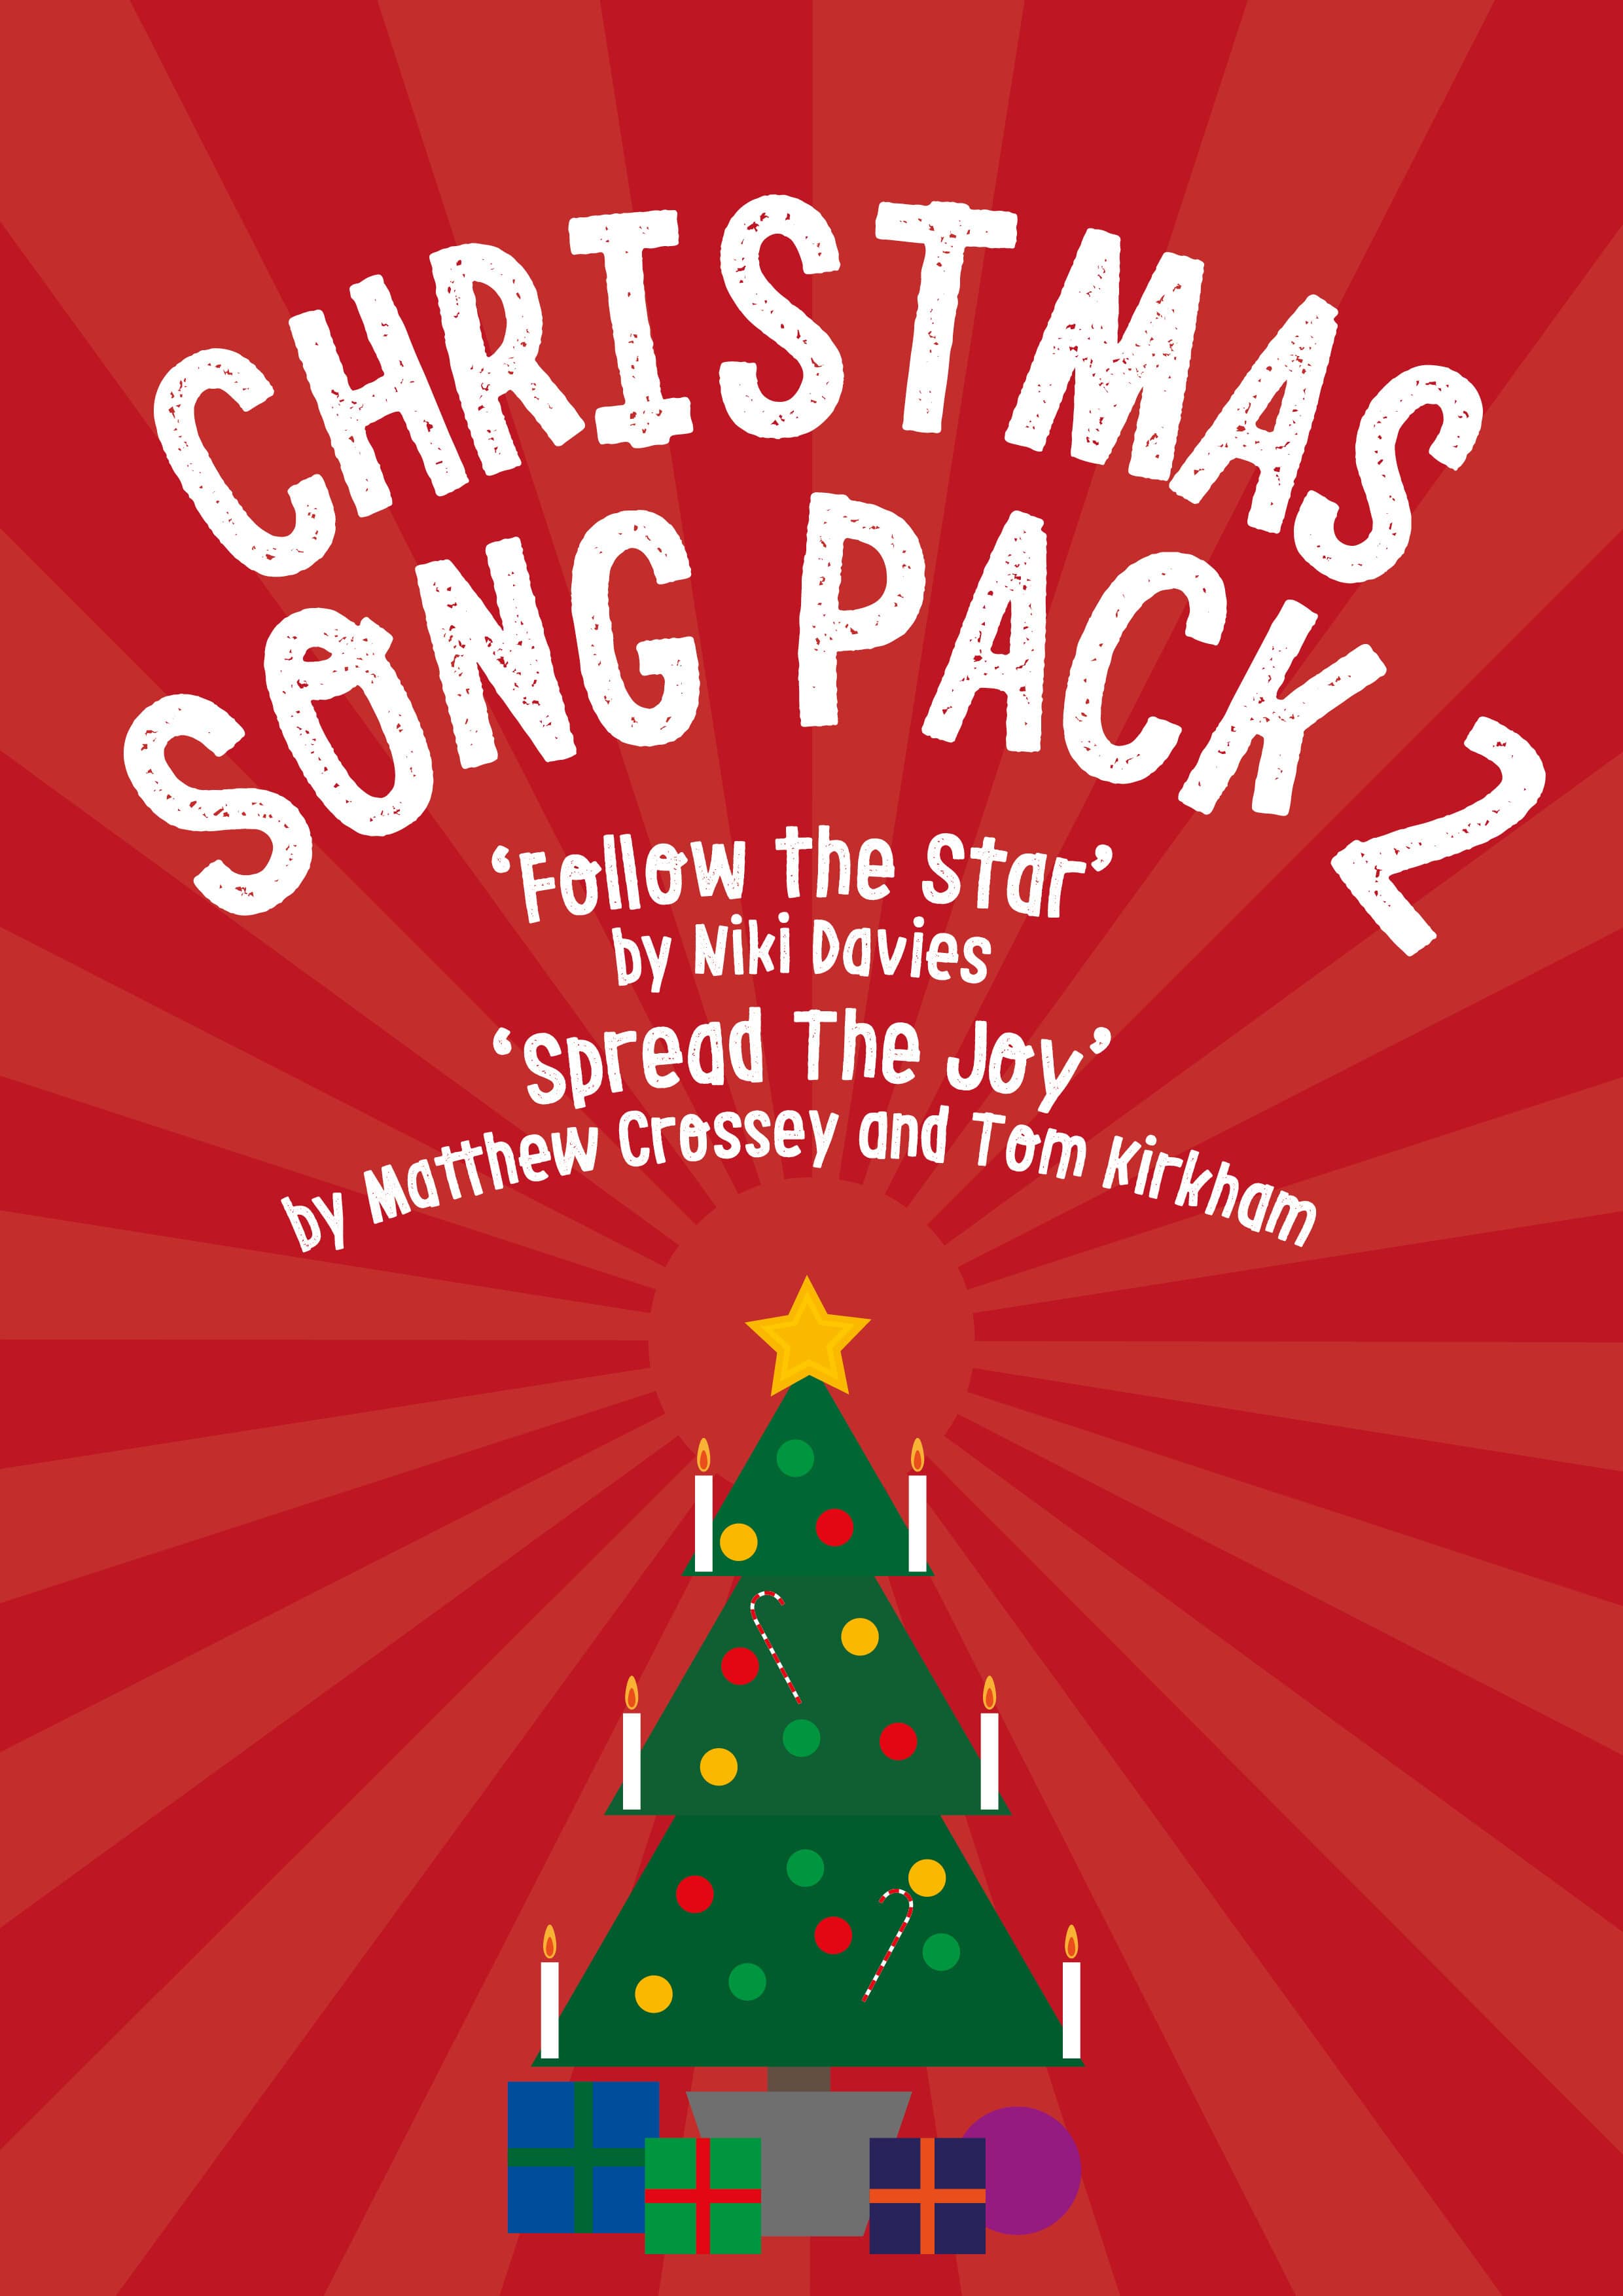 Christmas Songs Download Pack Two - 100% discount with code CHRISTMAS2